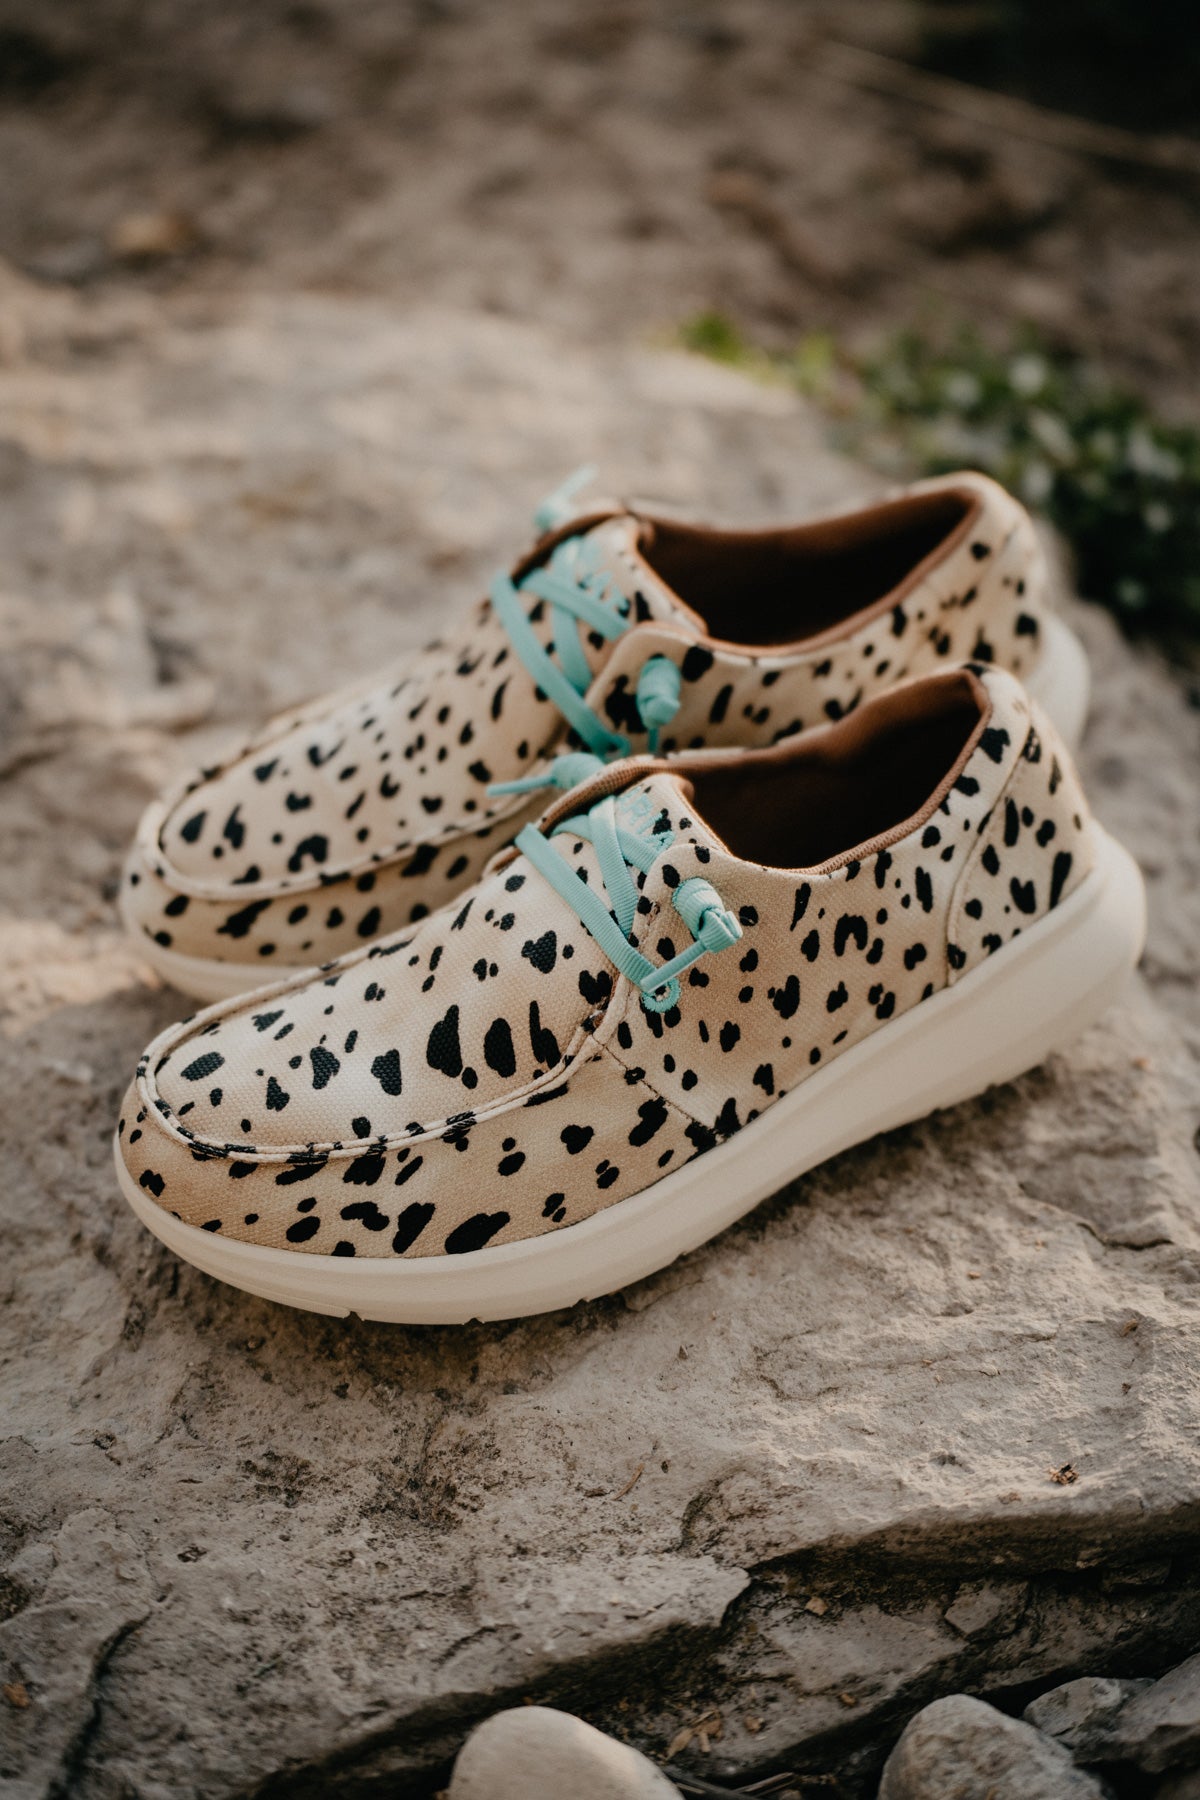 Animal Print Ariat Hilo Shoes (1 Size 6 Only)